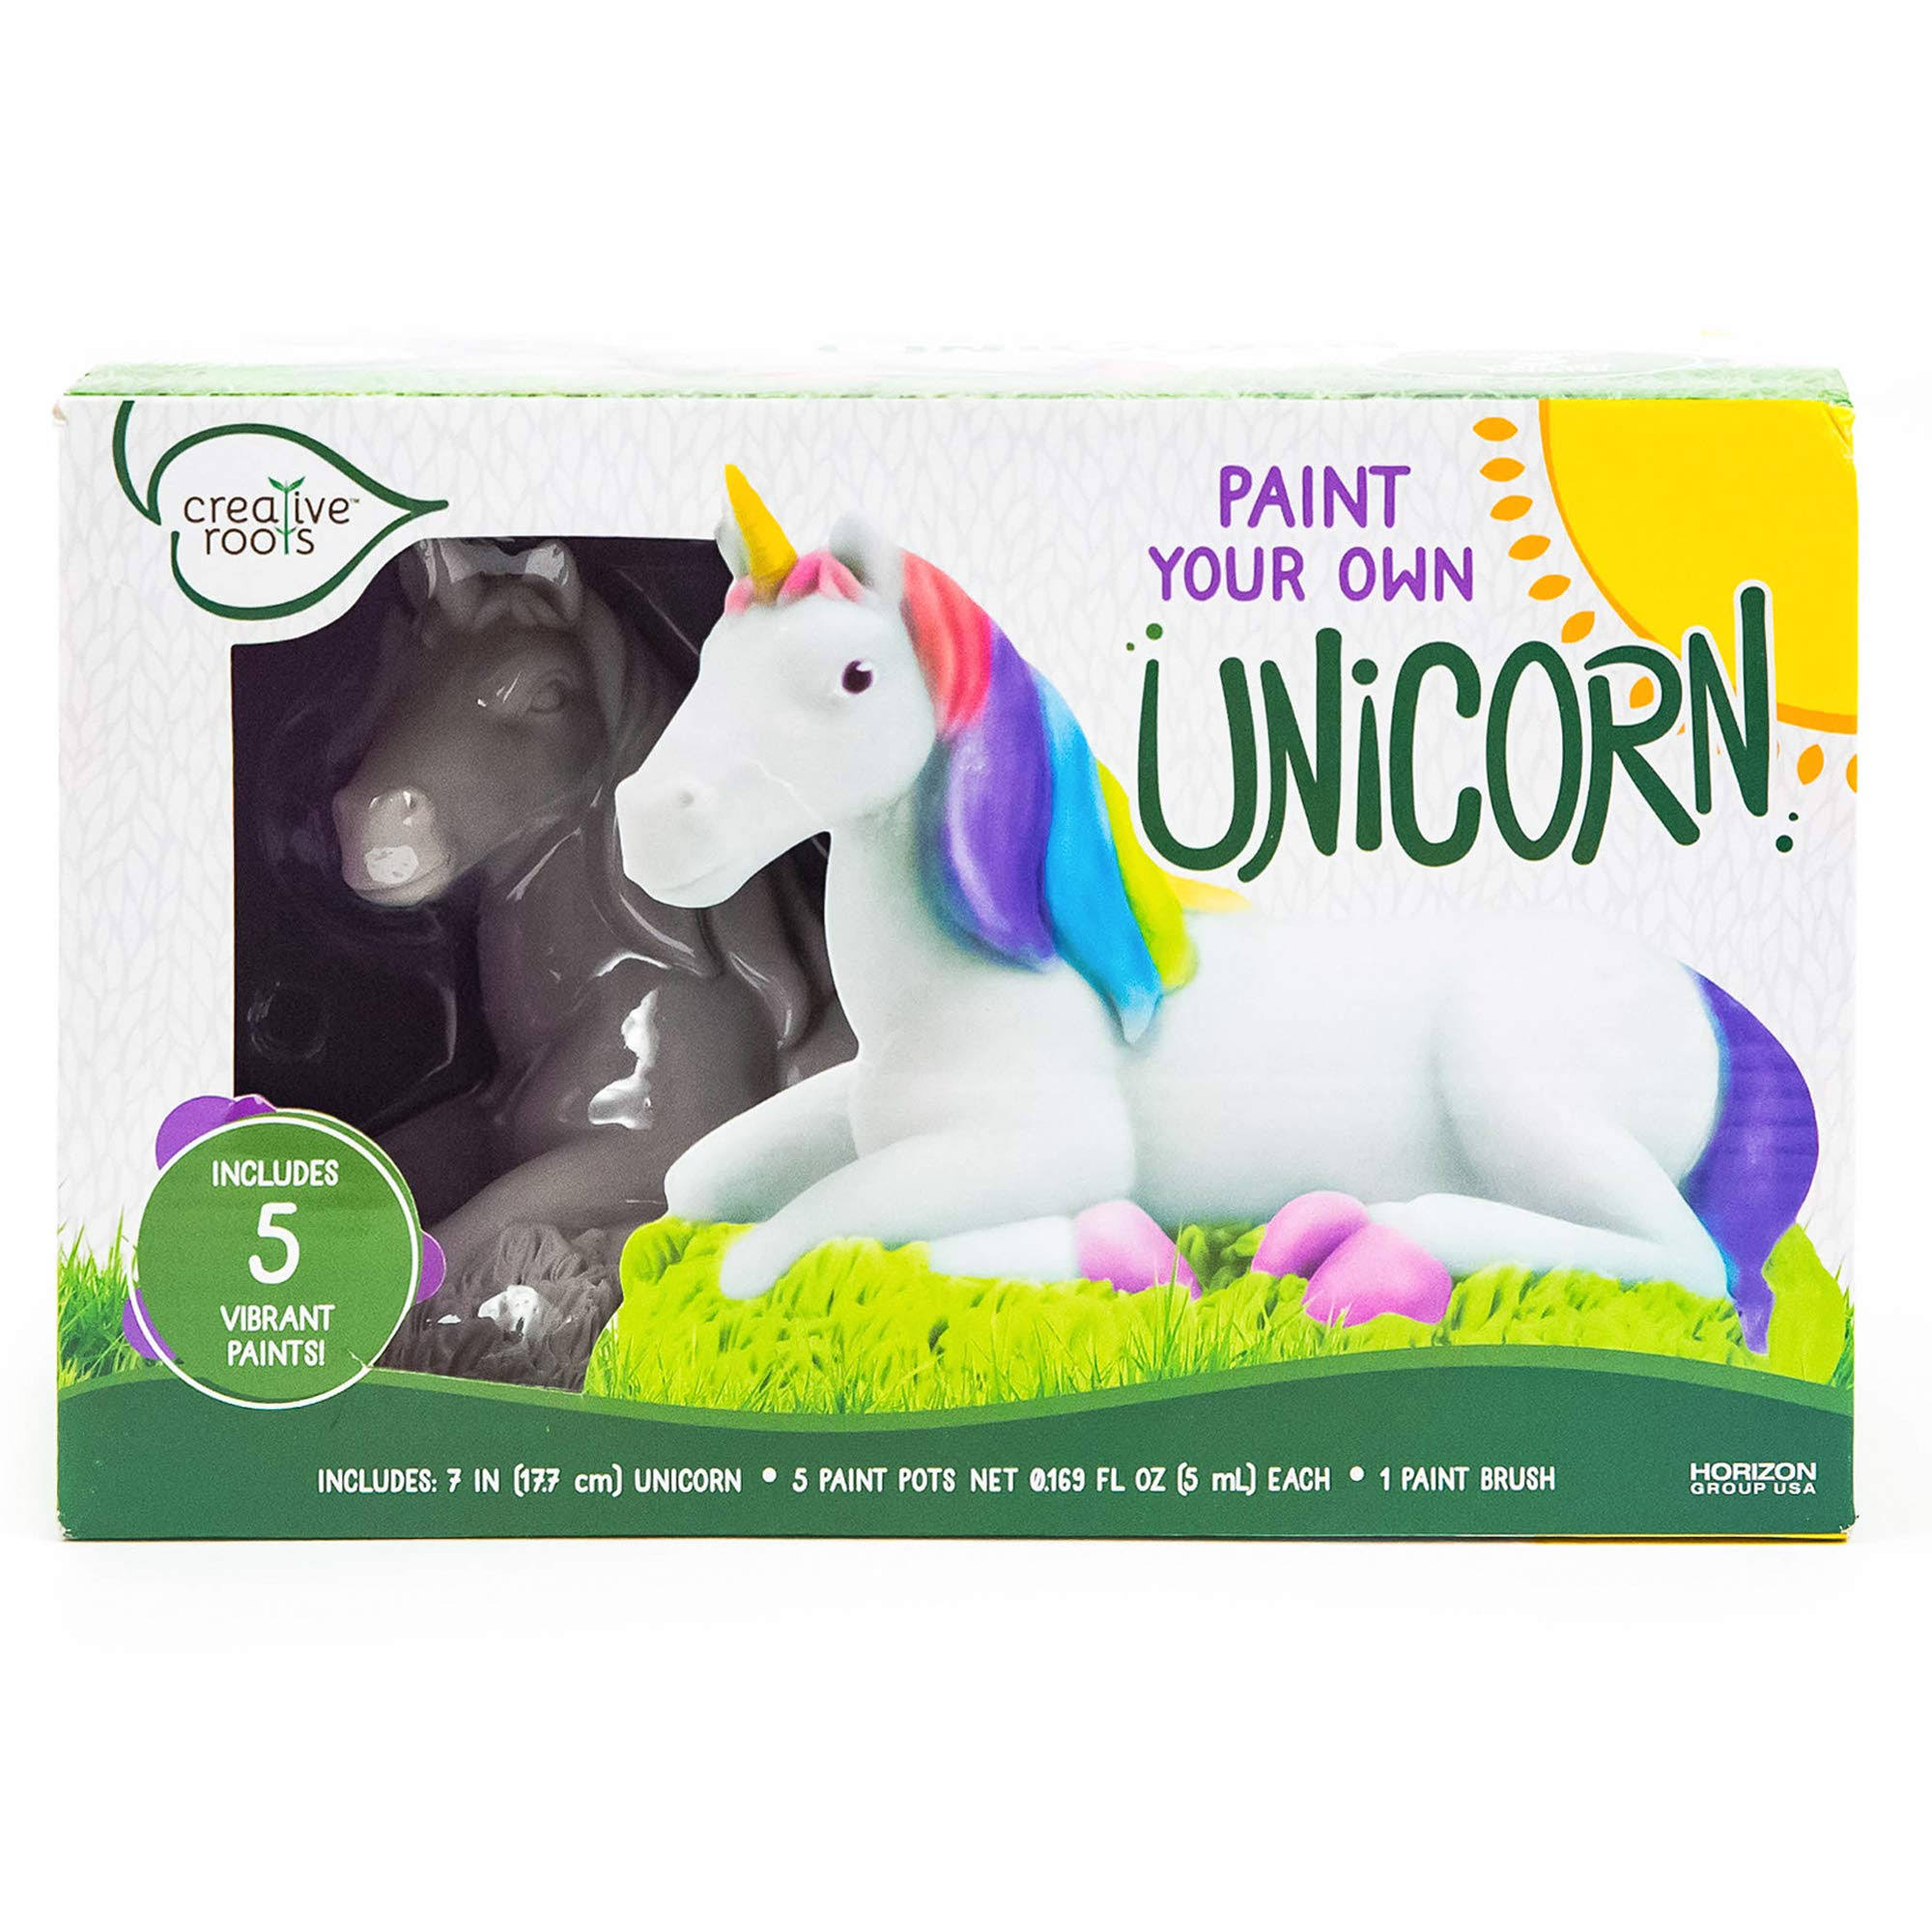 Creative Roots Paint Your Own Unicorn Craft Kit